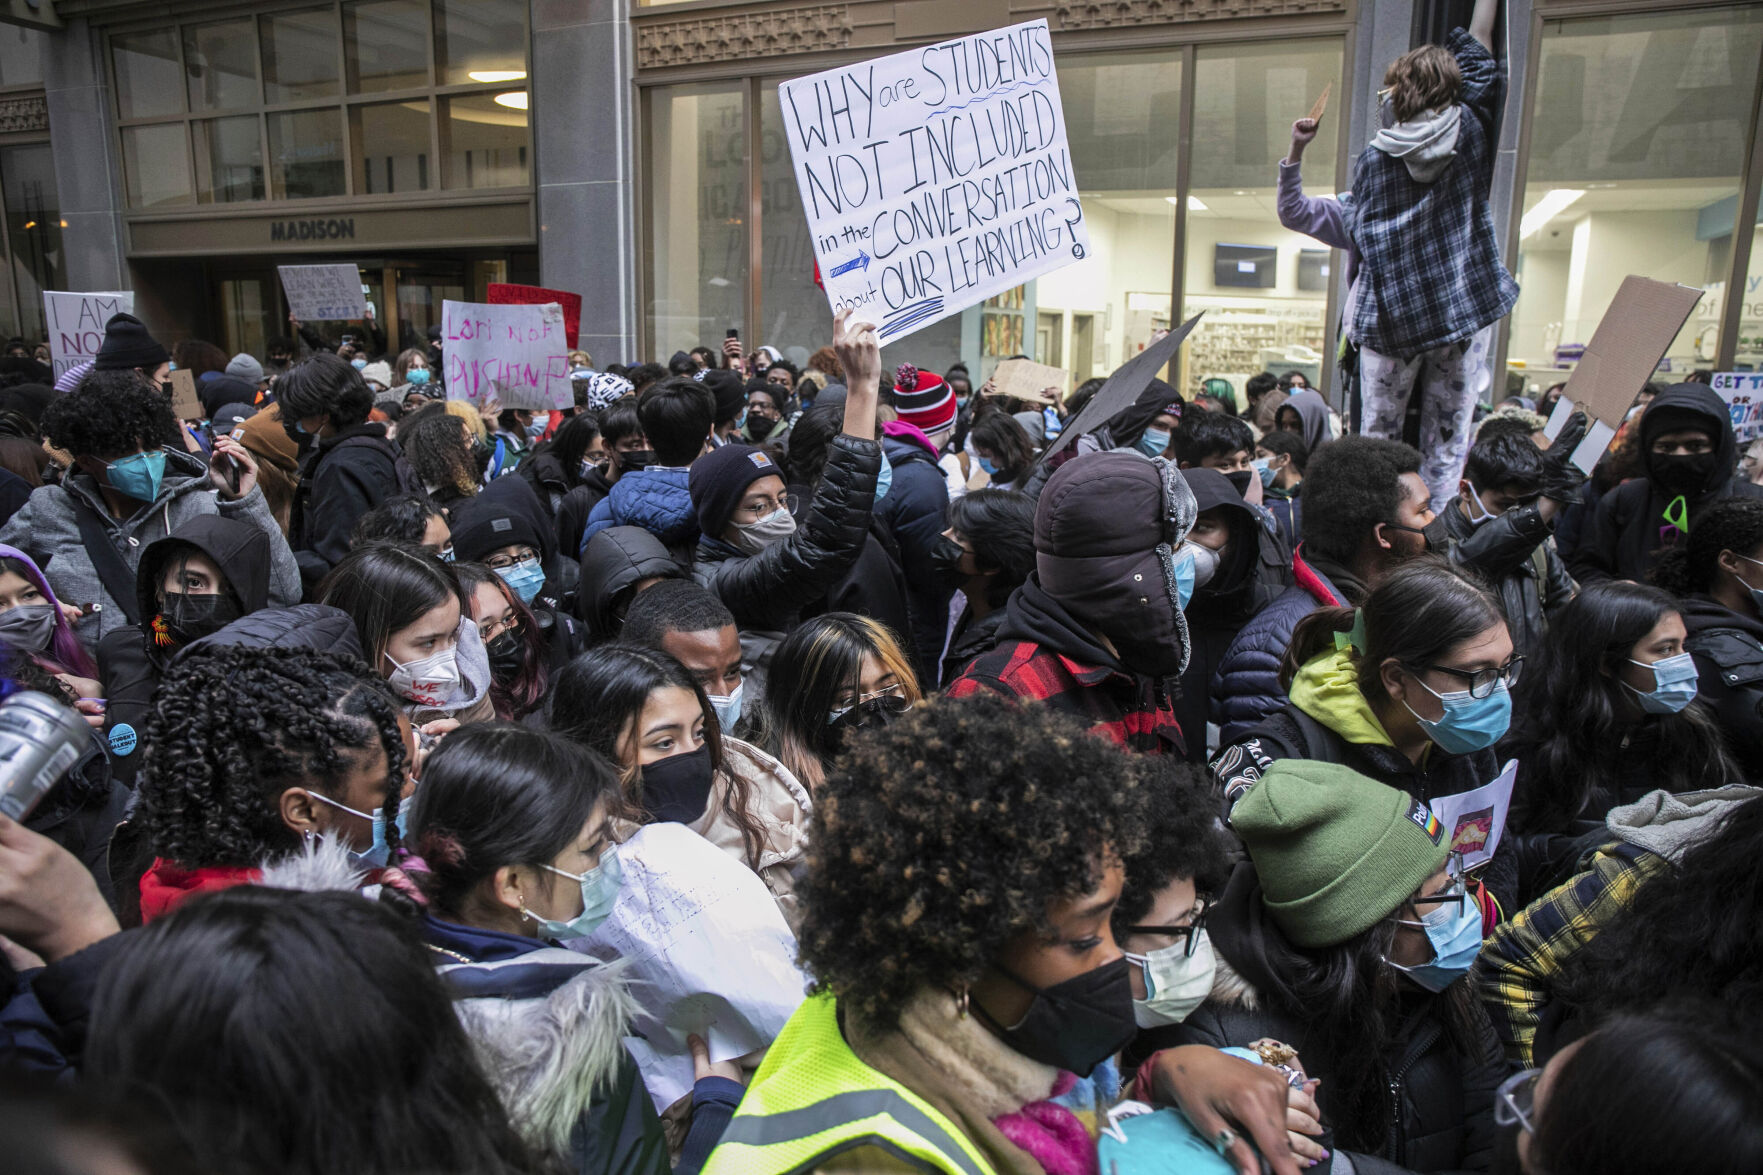 <p>FILE - Chicago Public Schools students protest outside the Chicago Public Schools headquarters during a district-wide walkout to demand officials include them in the conversation about COVID-19 safety in schools in Chicago, on Jan. 14, 2022. From March 2020 to June 2021, the average student in Chicago lost 21 weeks of learning in reading and 20 weeks in math, equivalent to missing half a year of school, according to Georgetown University’s Edunomics Lab, which analyzed data from a widely used test called MAP to estimate pandemic learning loss for every U.S. school district. (Pat Nabong/Chicago Sun-Times via AP, File)</p>   PHOTO CREDIT: Pat Nabong - member image share, Chicago Sun-Times